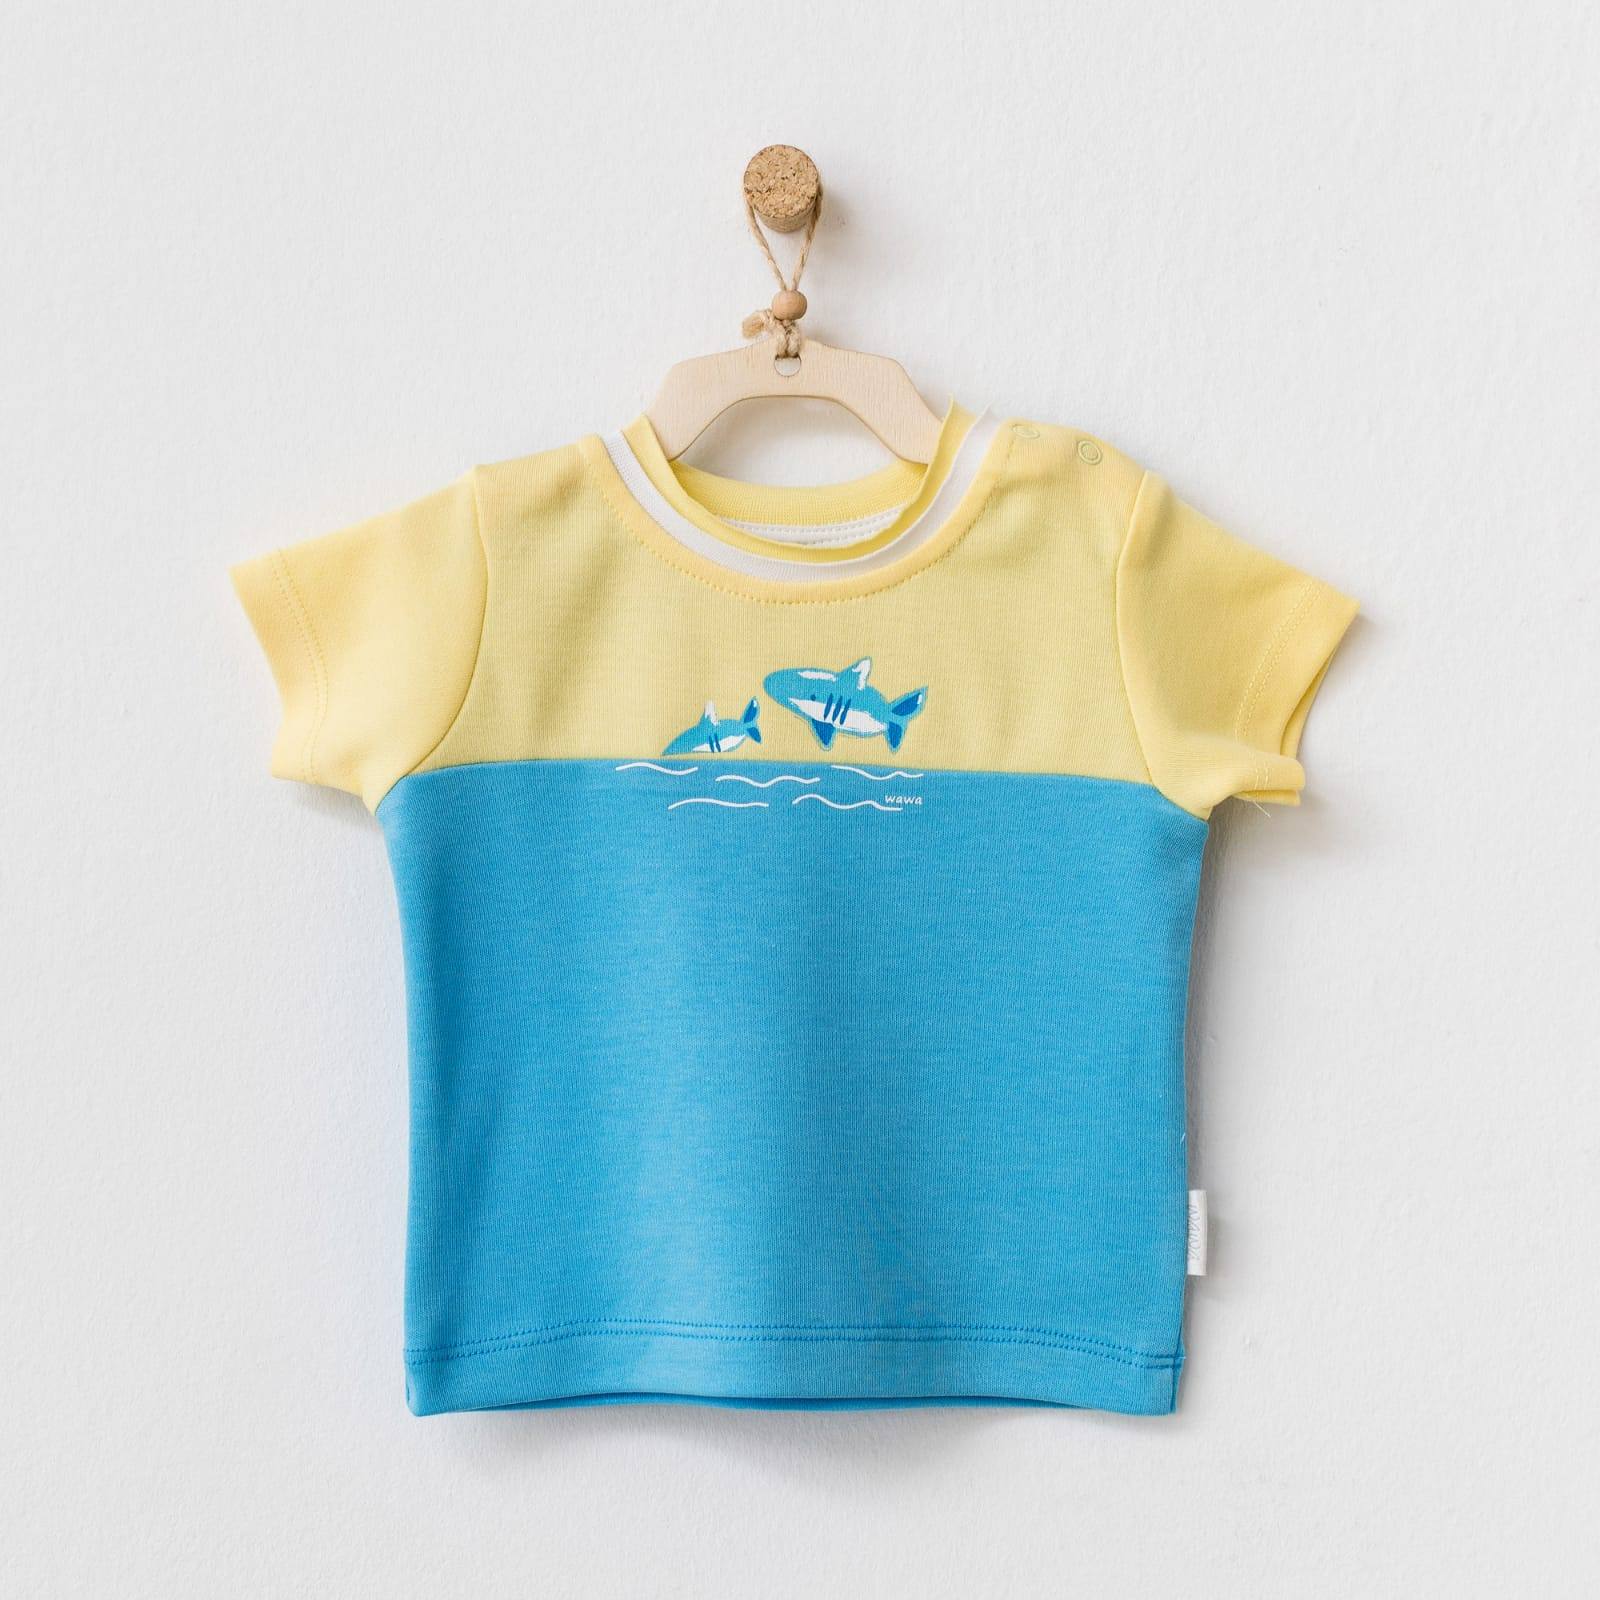 Playtime Cotton T-shirt - Playtime Cotton T-shirt - 1-3 Months - Andywawa - Melymod